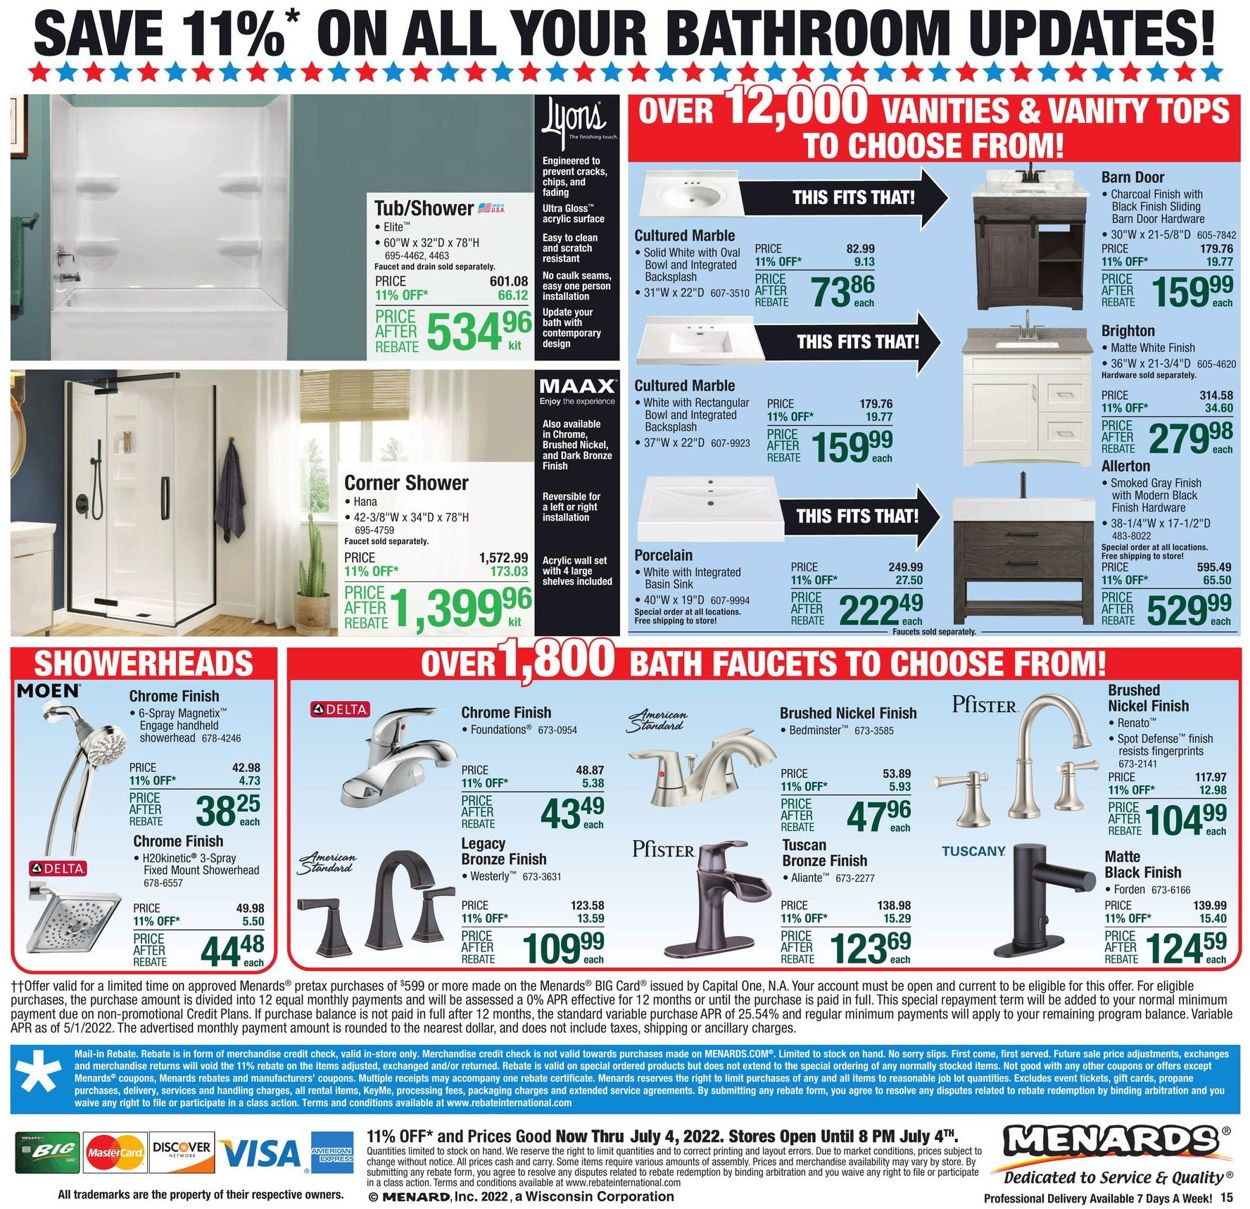 Catalogue Menards - 4th of July Sale from 06/23/2022